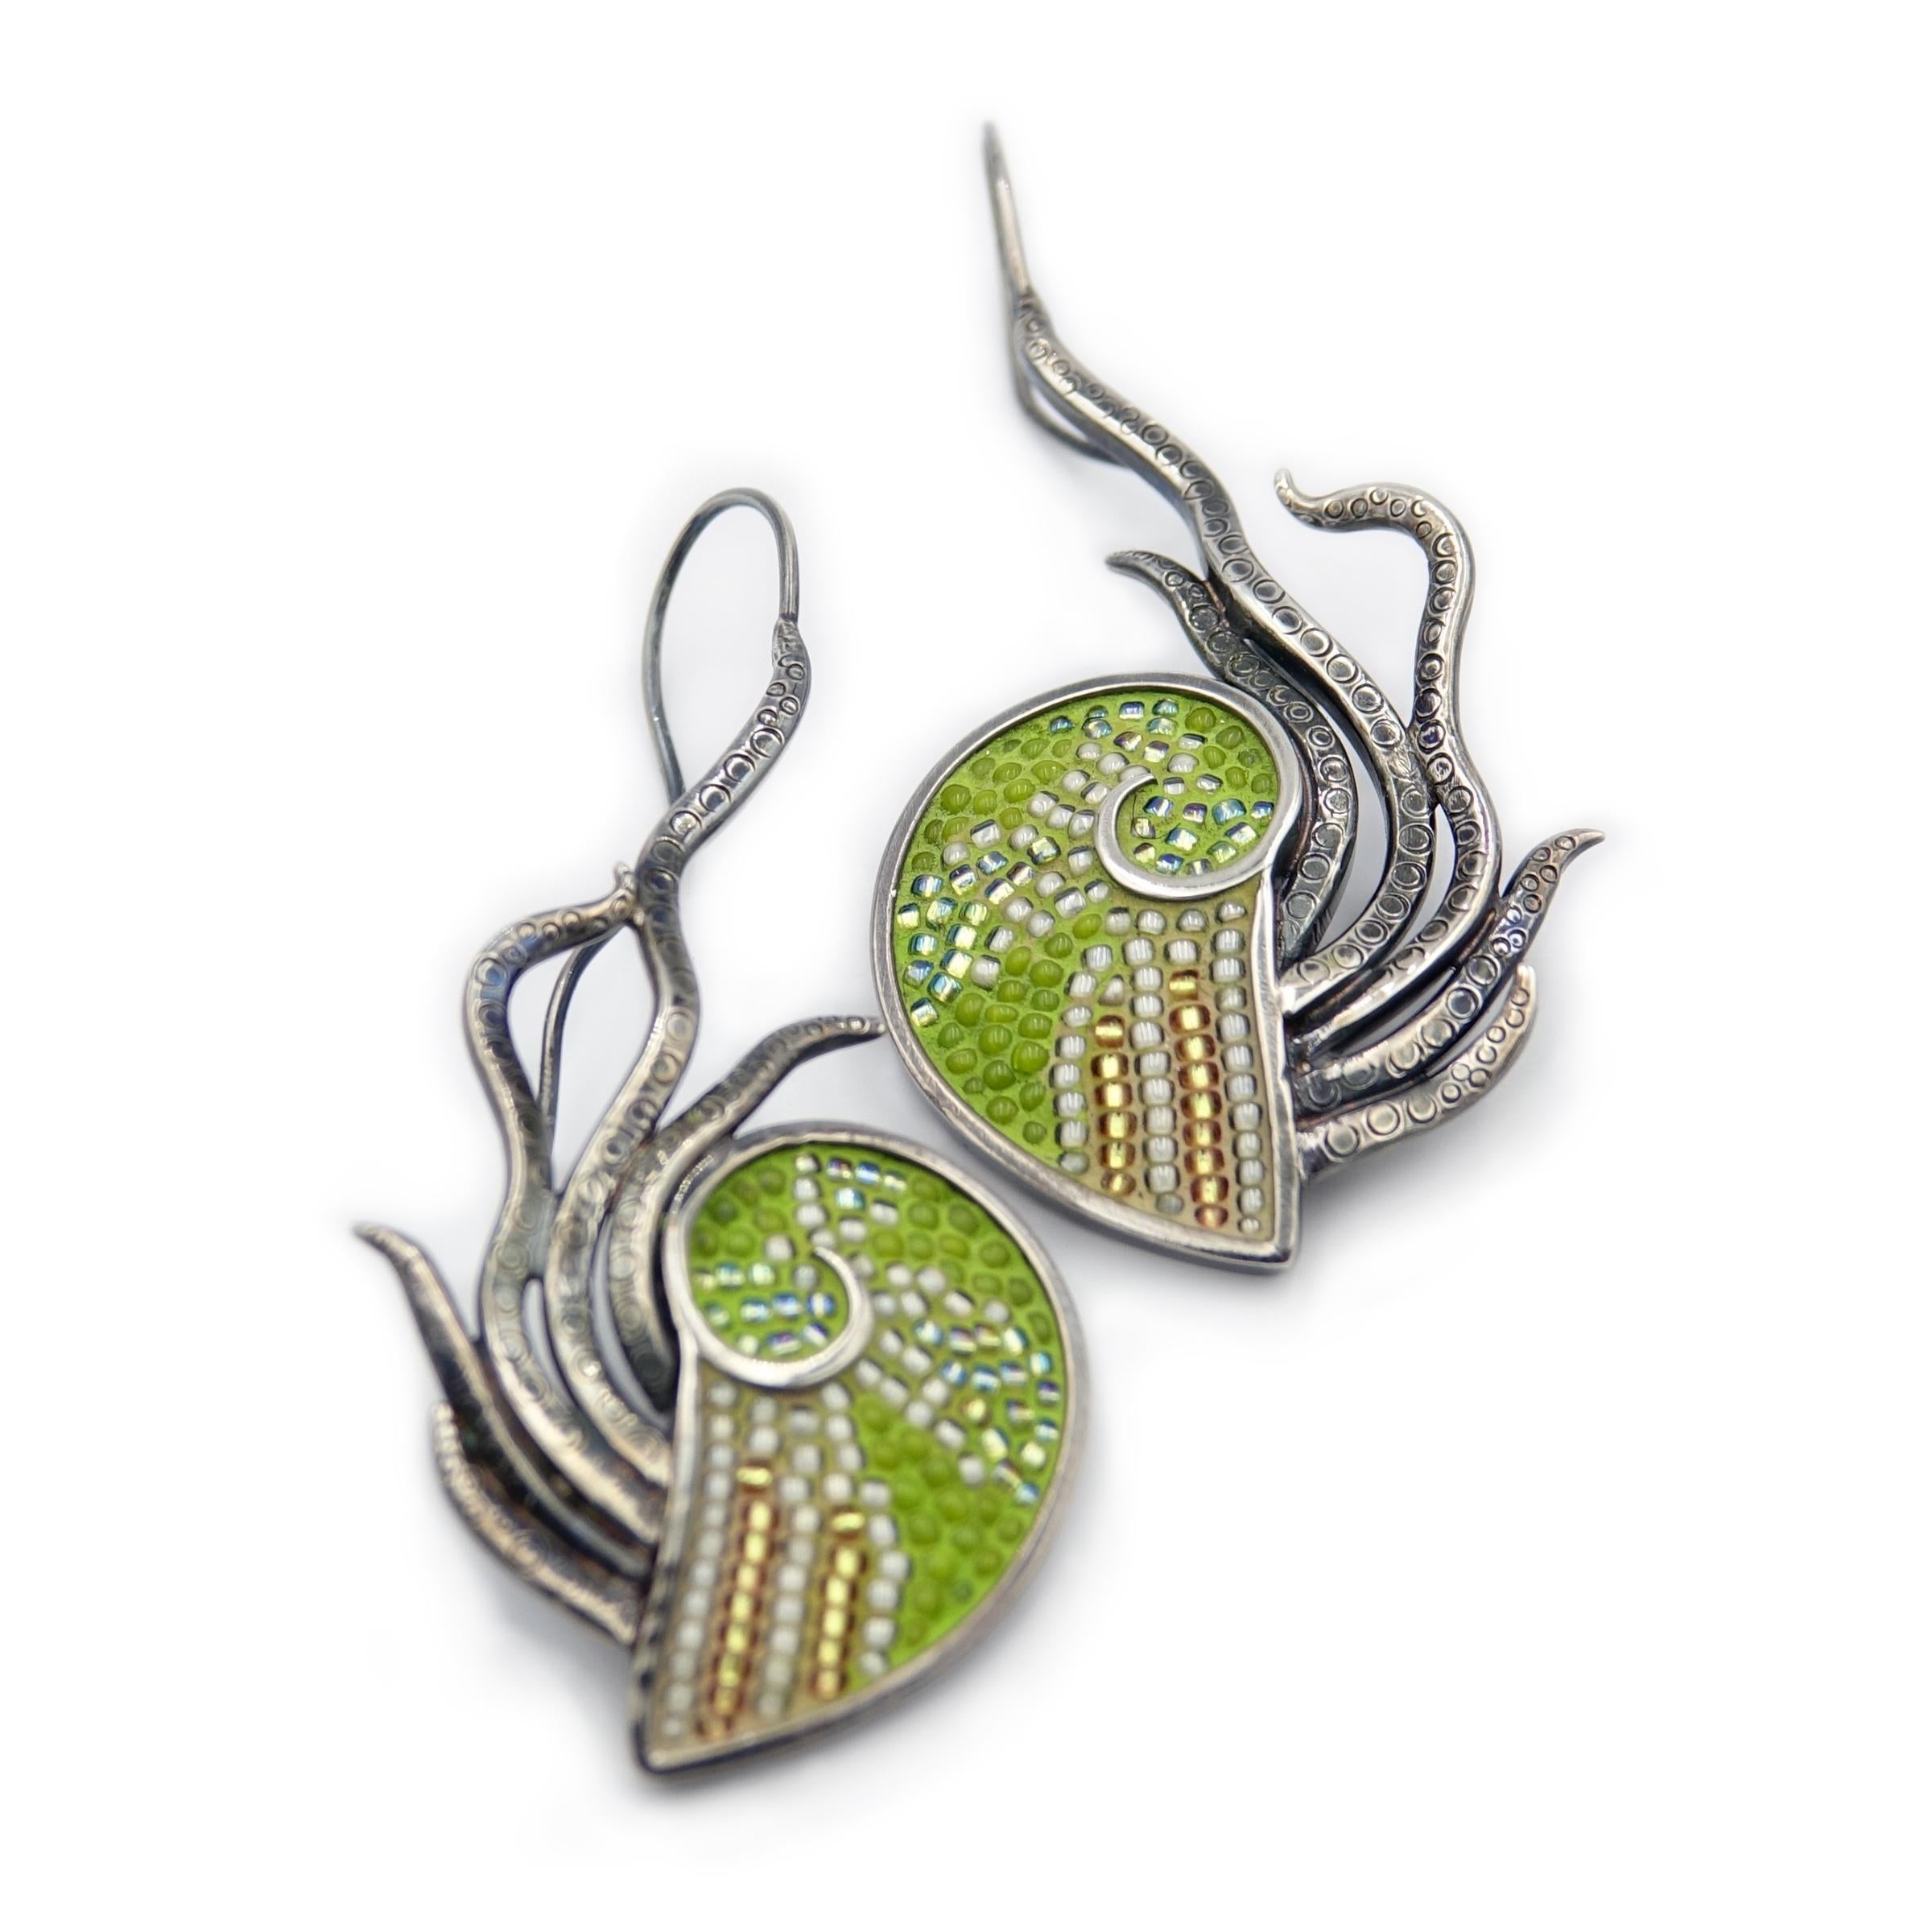 Green micro-mosaic nautilus earrings. Individual glass beads inlaid into a hand-forged sterling silver frame with fixed tentacles, detailed with circular suckers. See separate listing for matching Nautilove pendant.

This pendant is part of a body